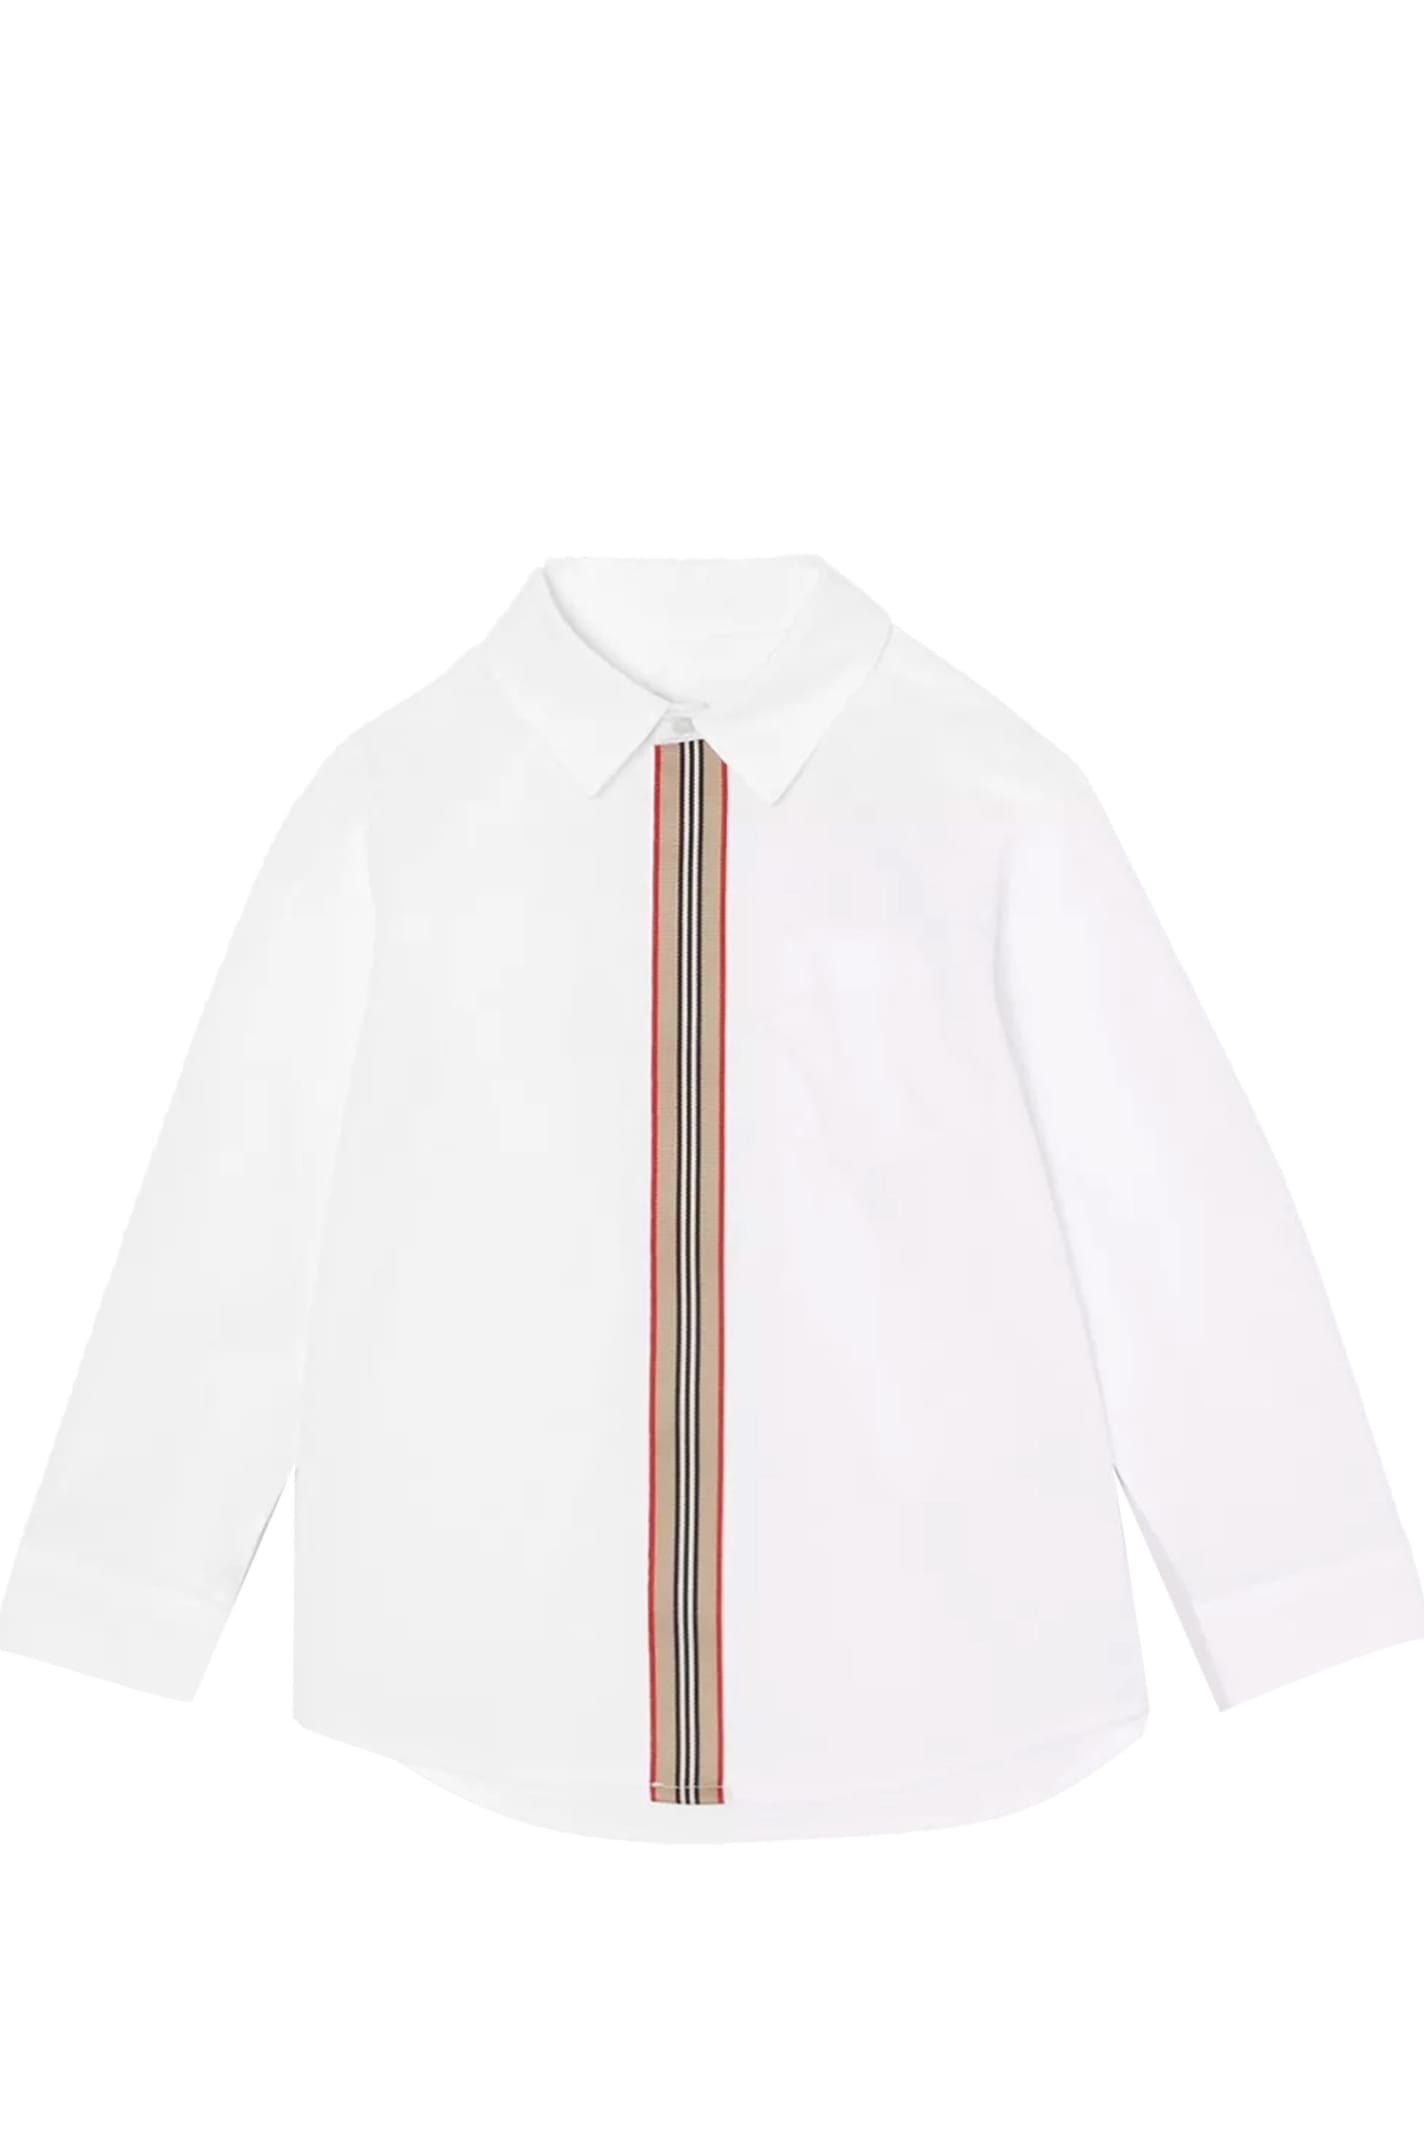 Burberry Kids' Cotton Shirt In White